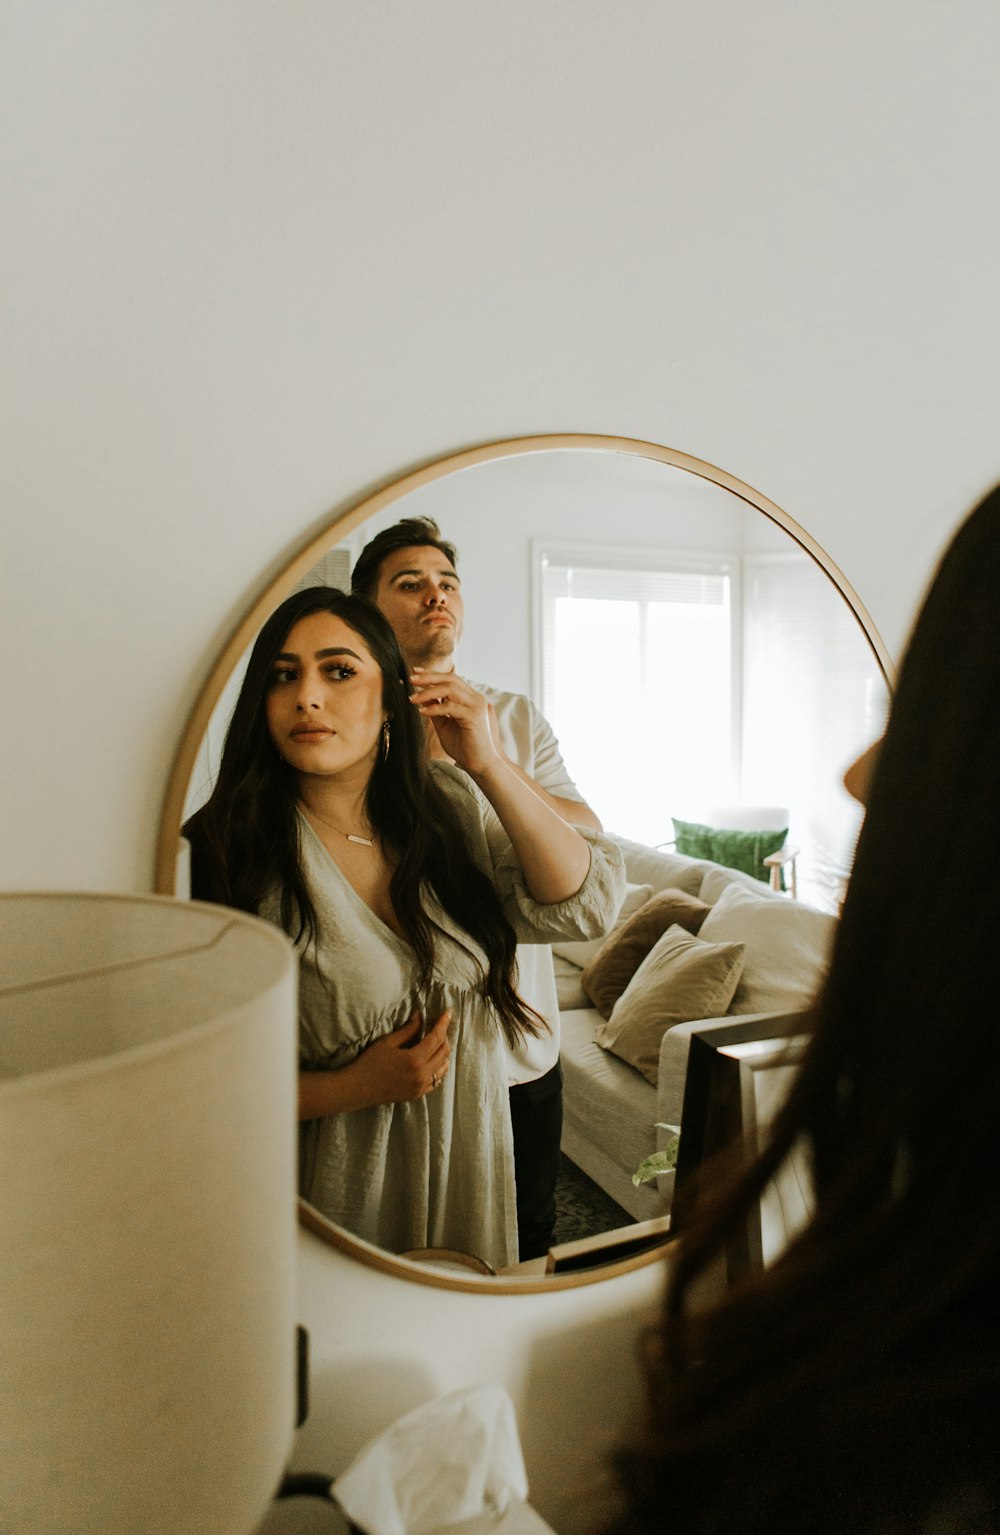 a man and woman taking a selfie in a mirror